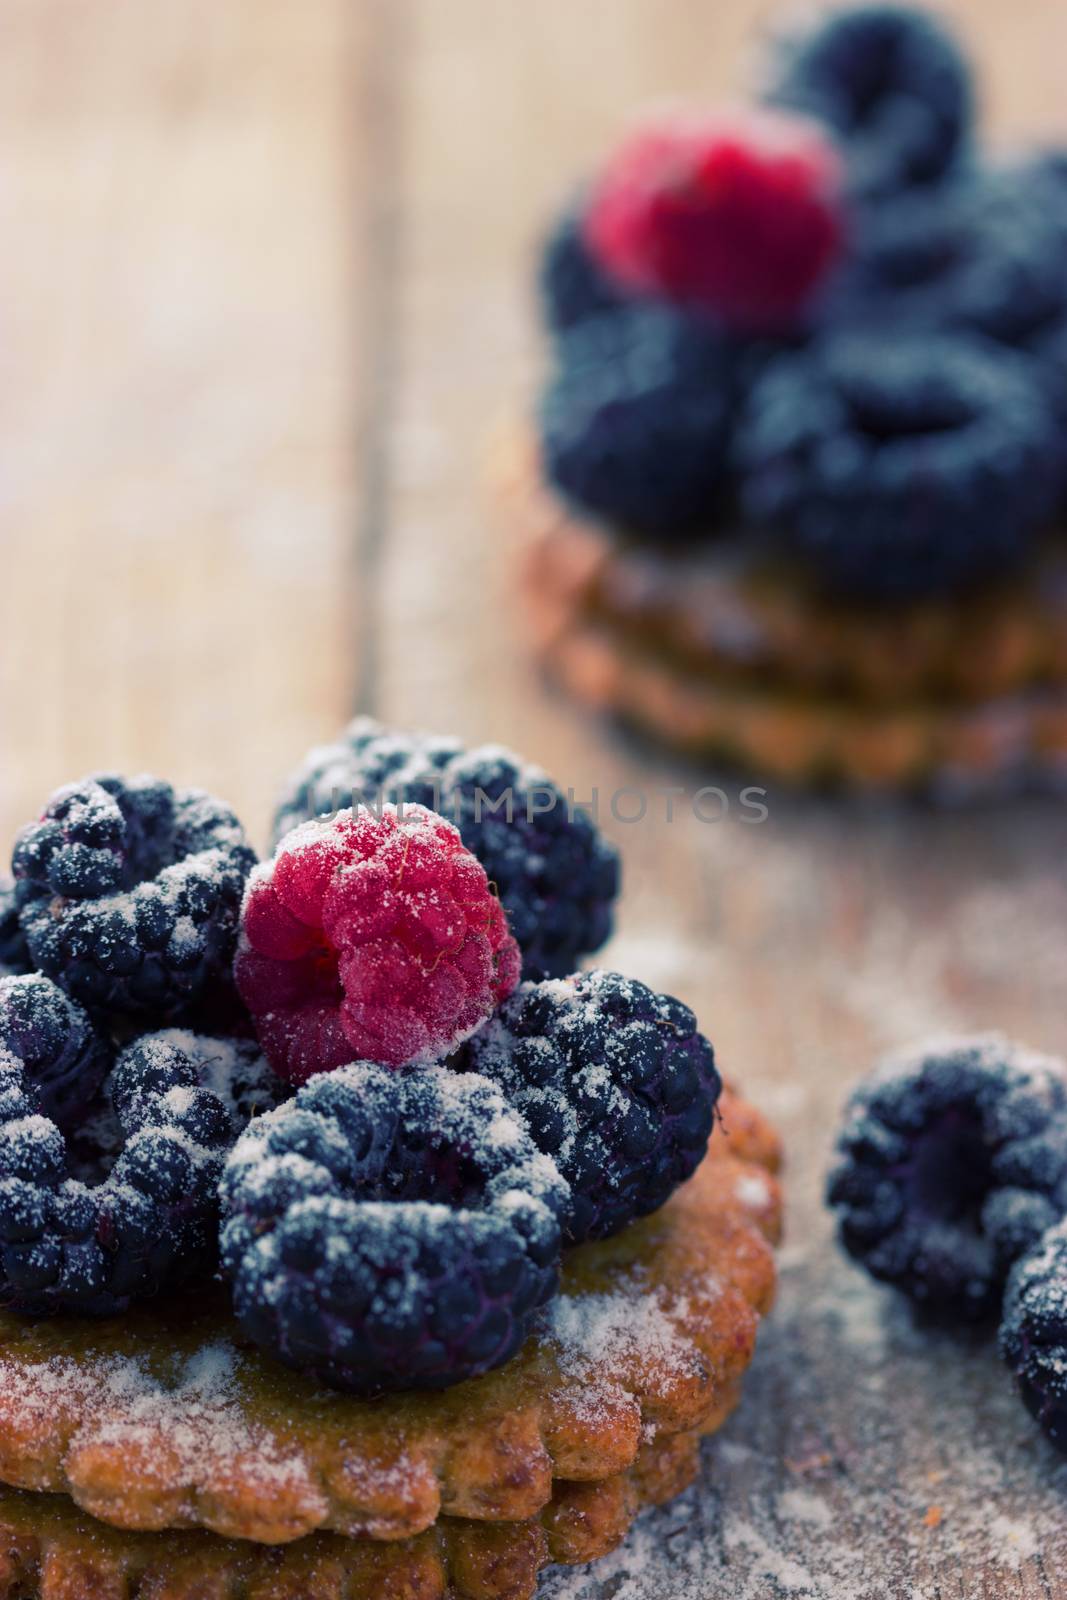 Fresh berry tartlet or cake filled with raspberry blackberry icing